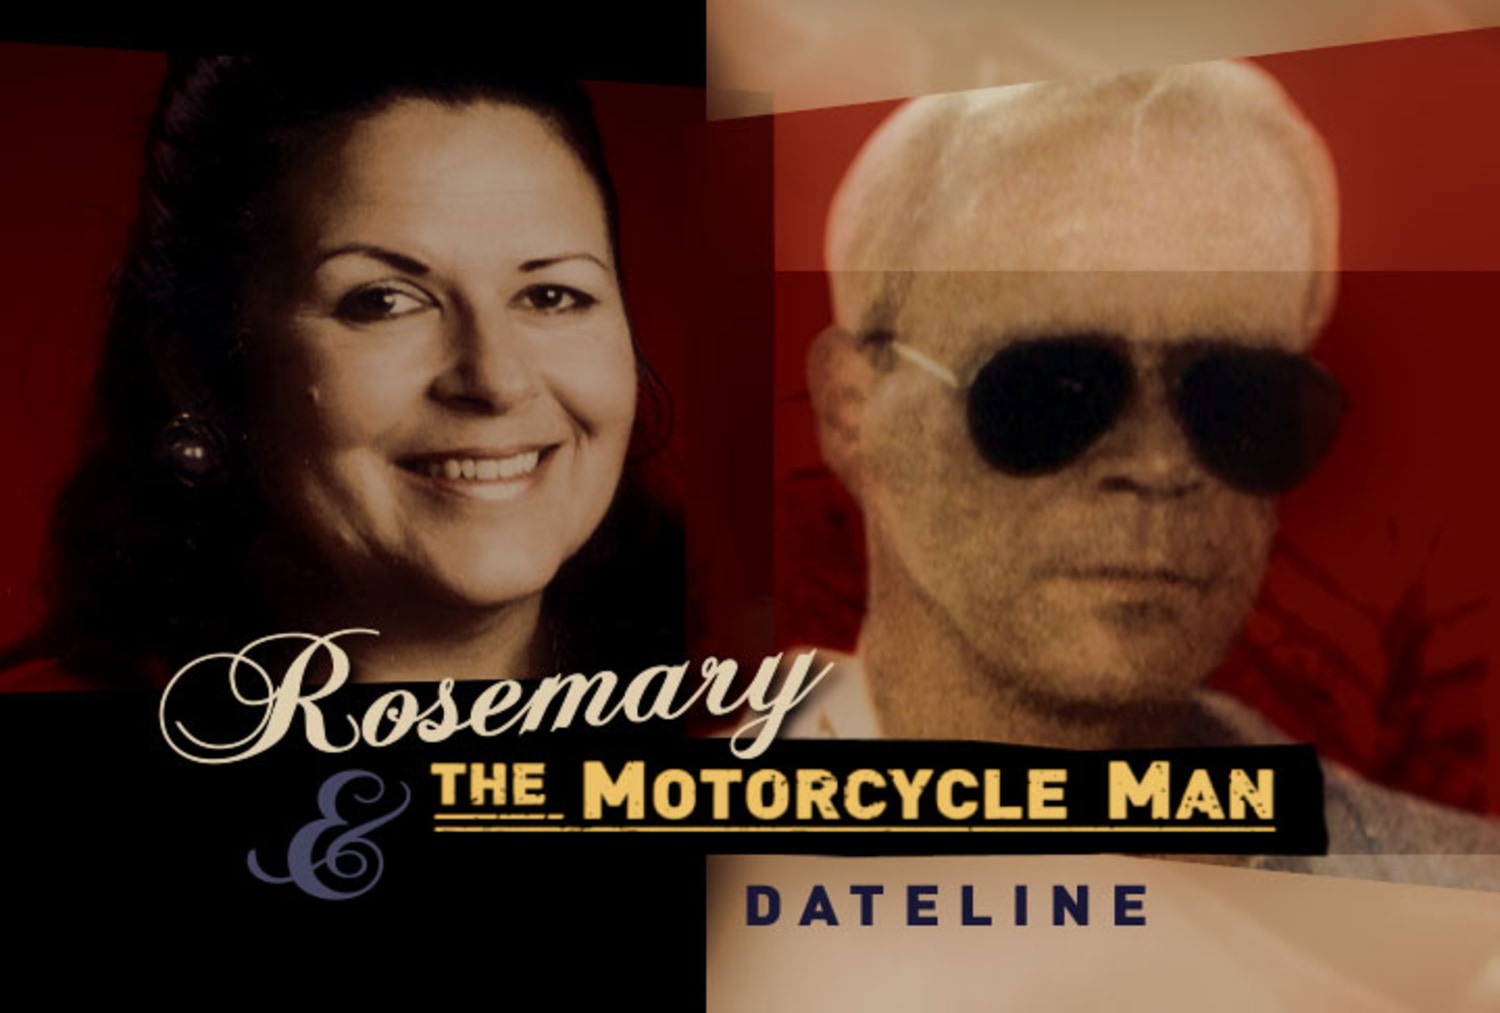 Rosemary the Motorcycle Man